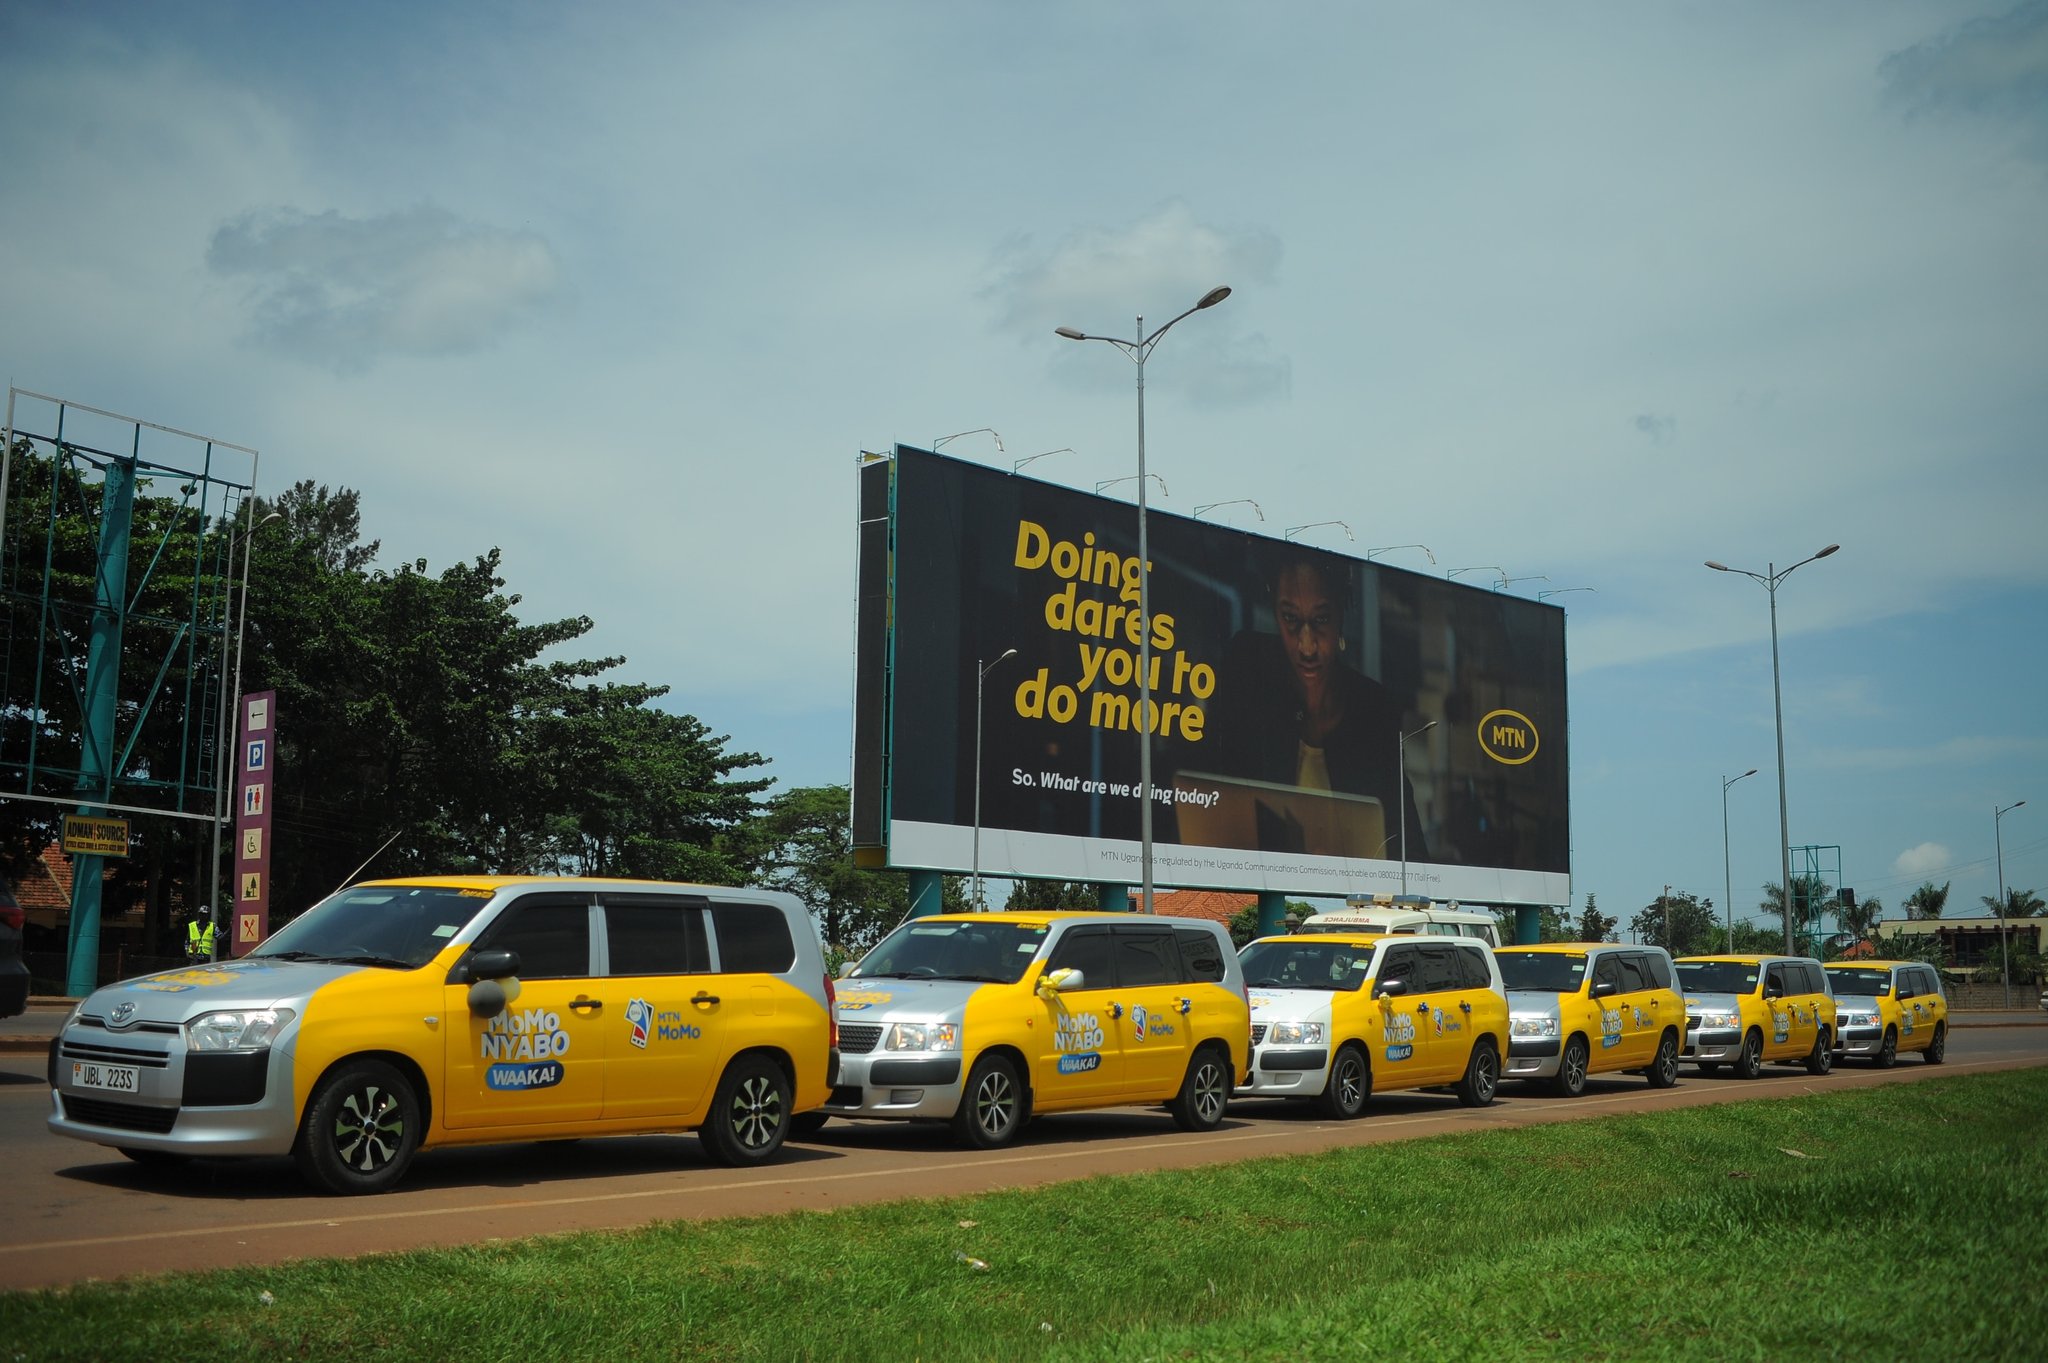 24 lucky MTN MoMo customers will win one of these Toyota Succeed cars in the ongoing MTN MoMo Nyabo Waaka promotion